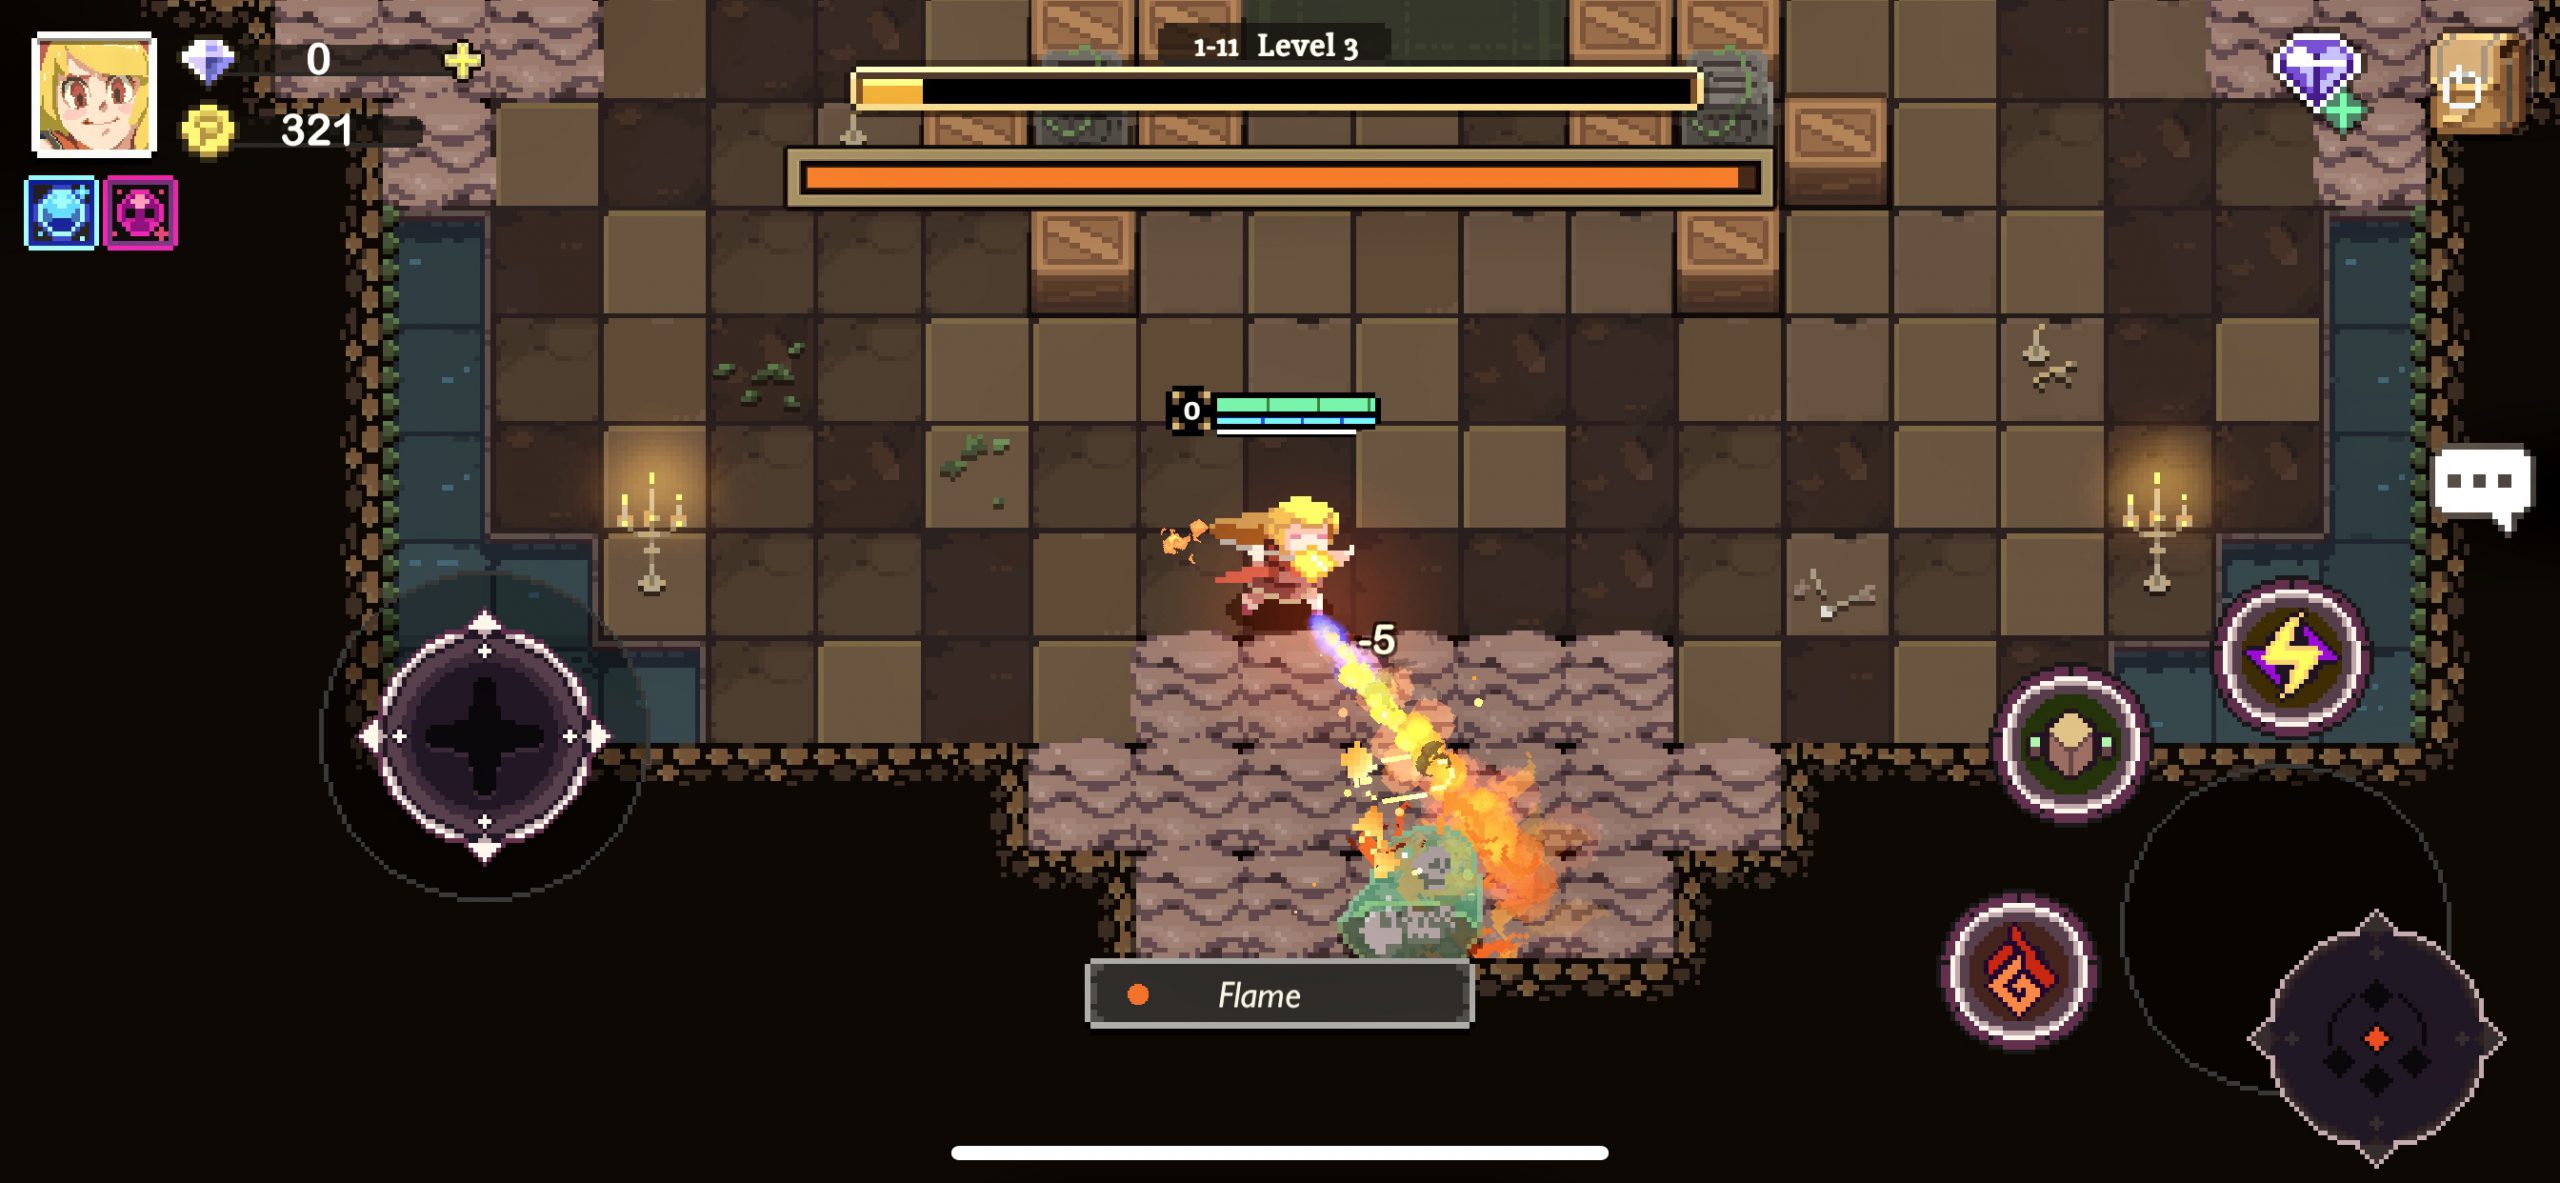 Elemental Dungeon Review – A Neat Midcore Roguelite